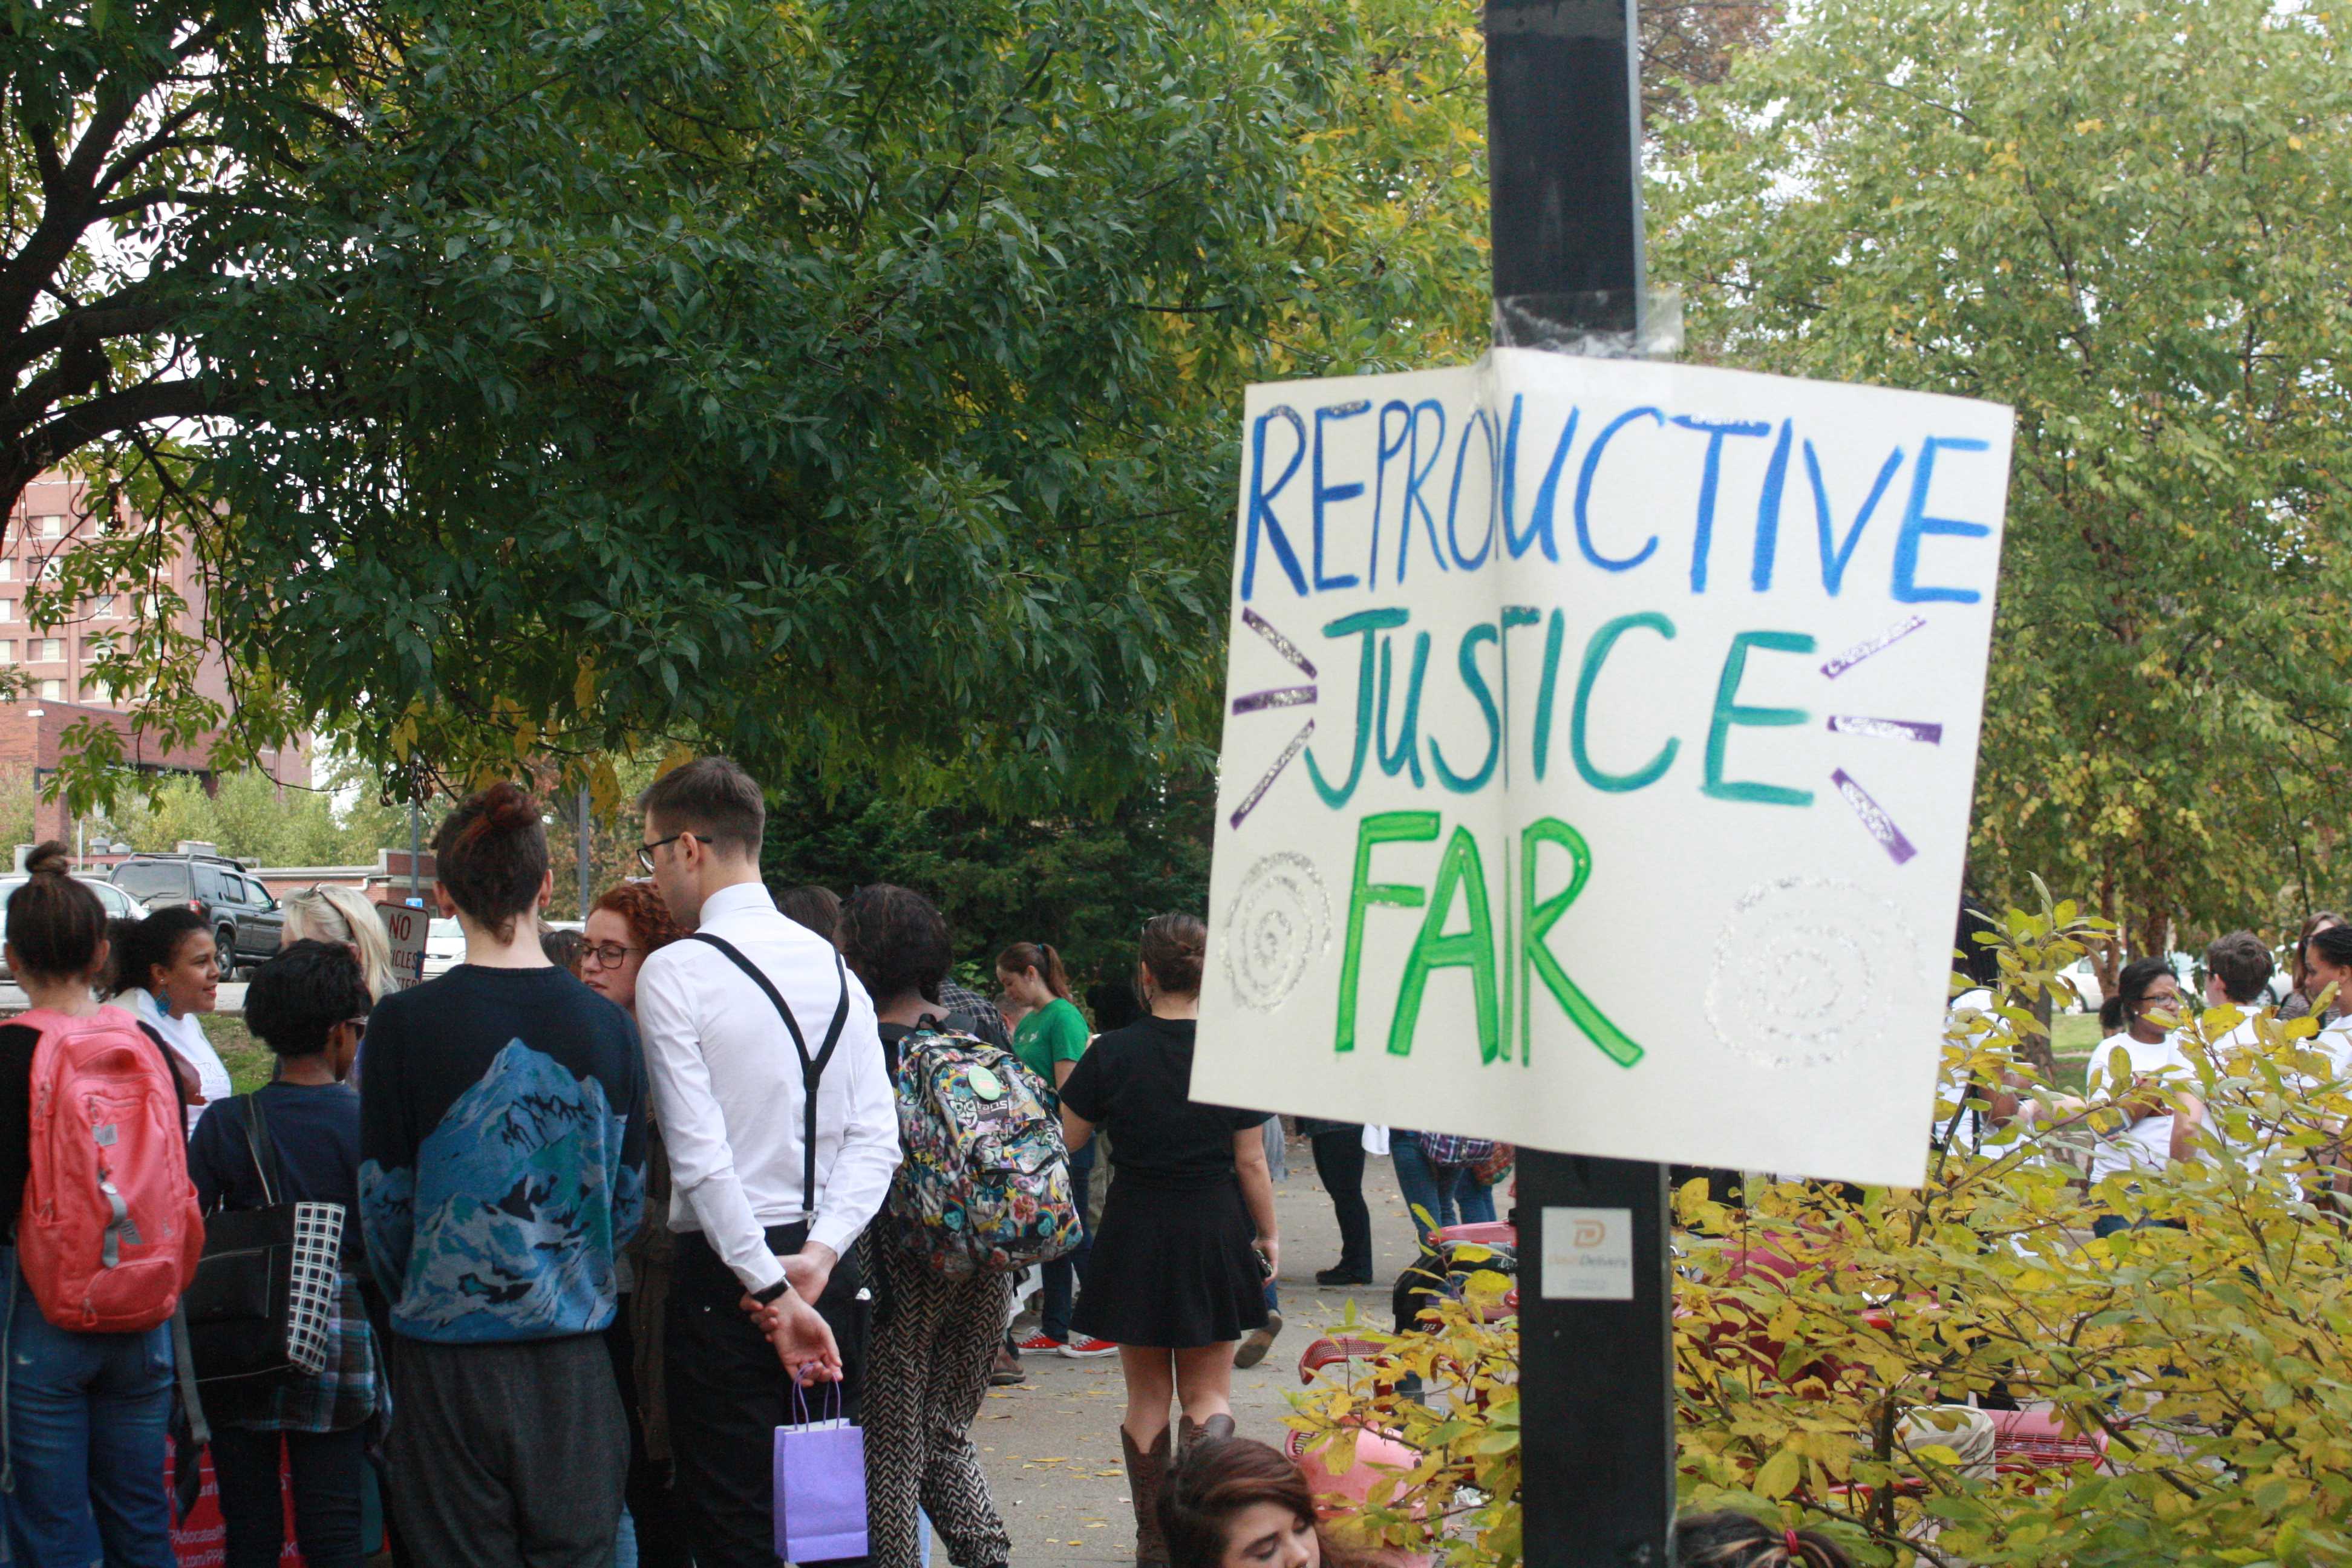 Reproductive Justice Fair sign  hangs on pole. Photo by Phoebe Monsour.